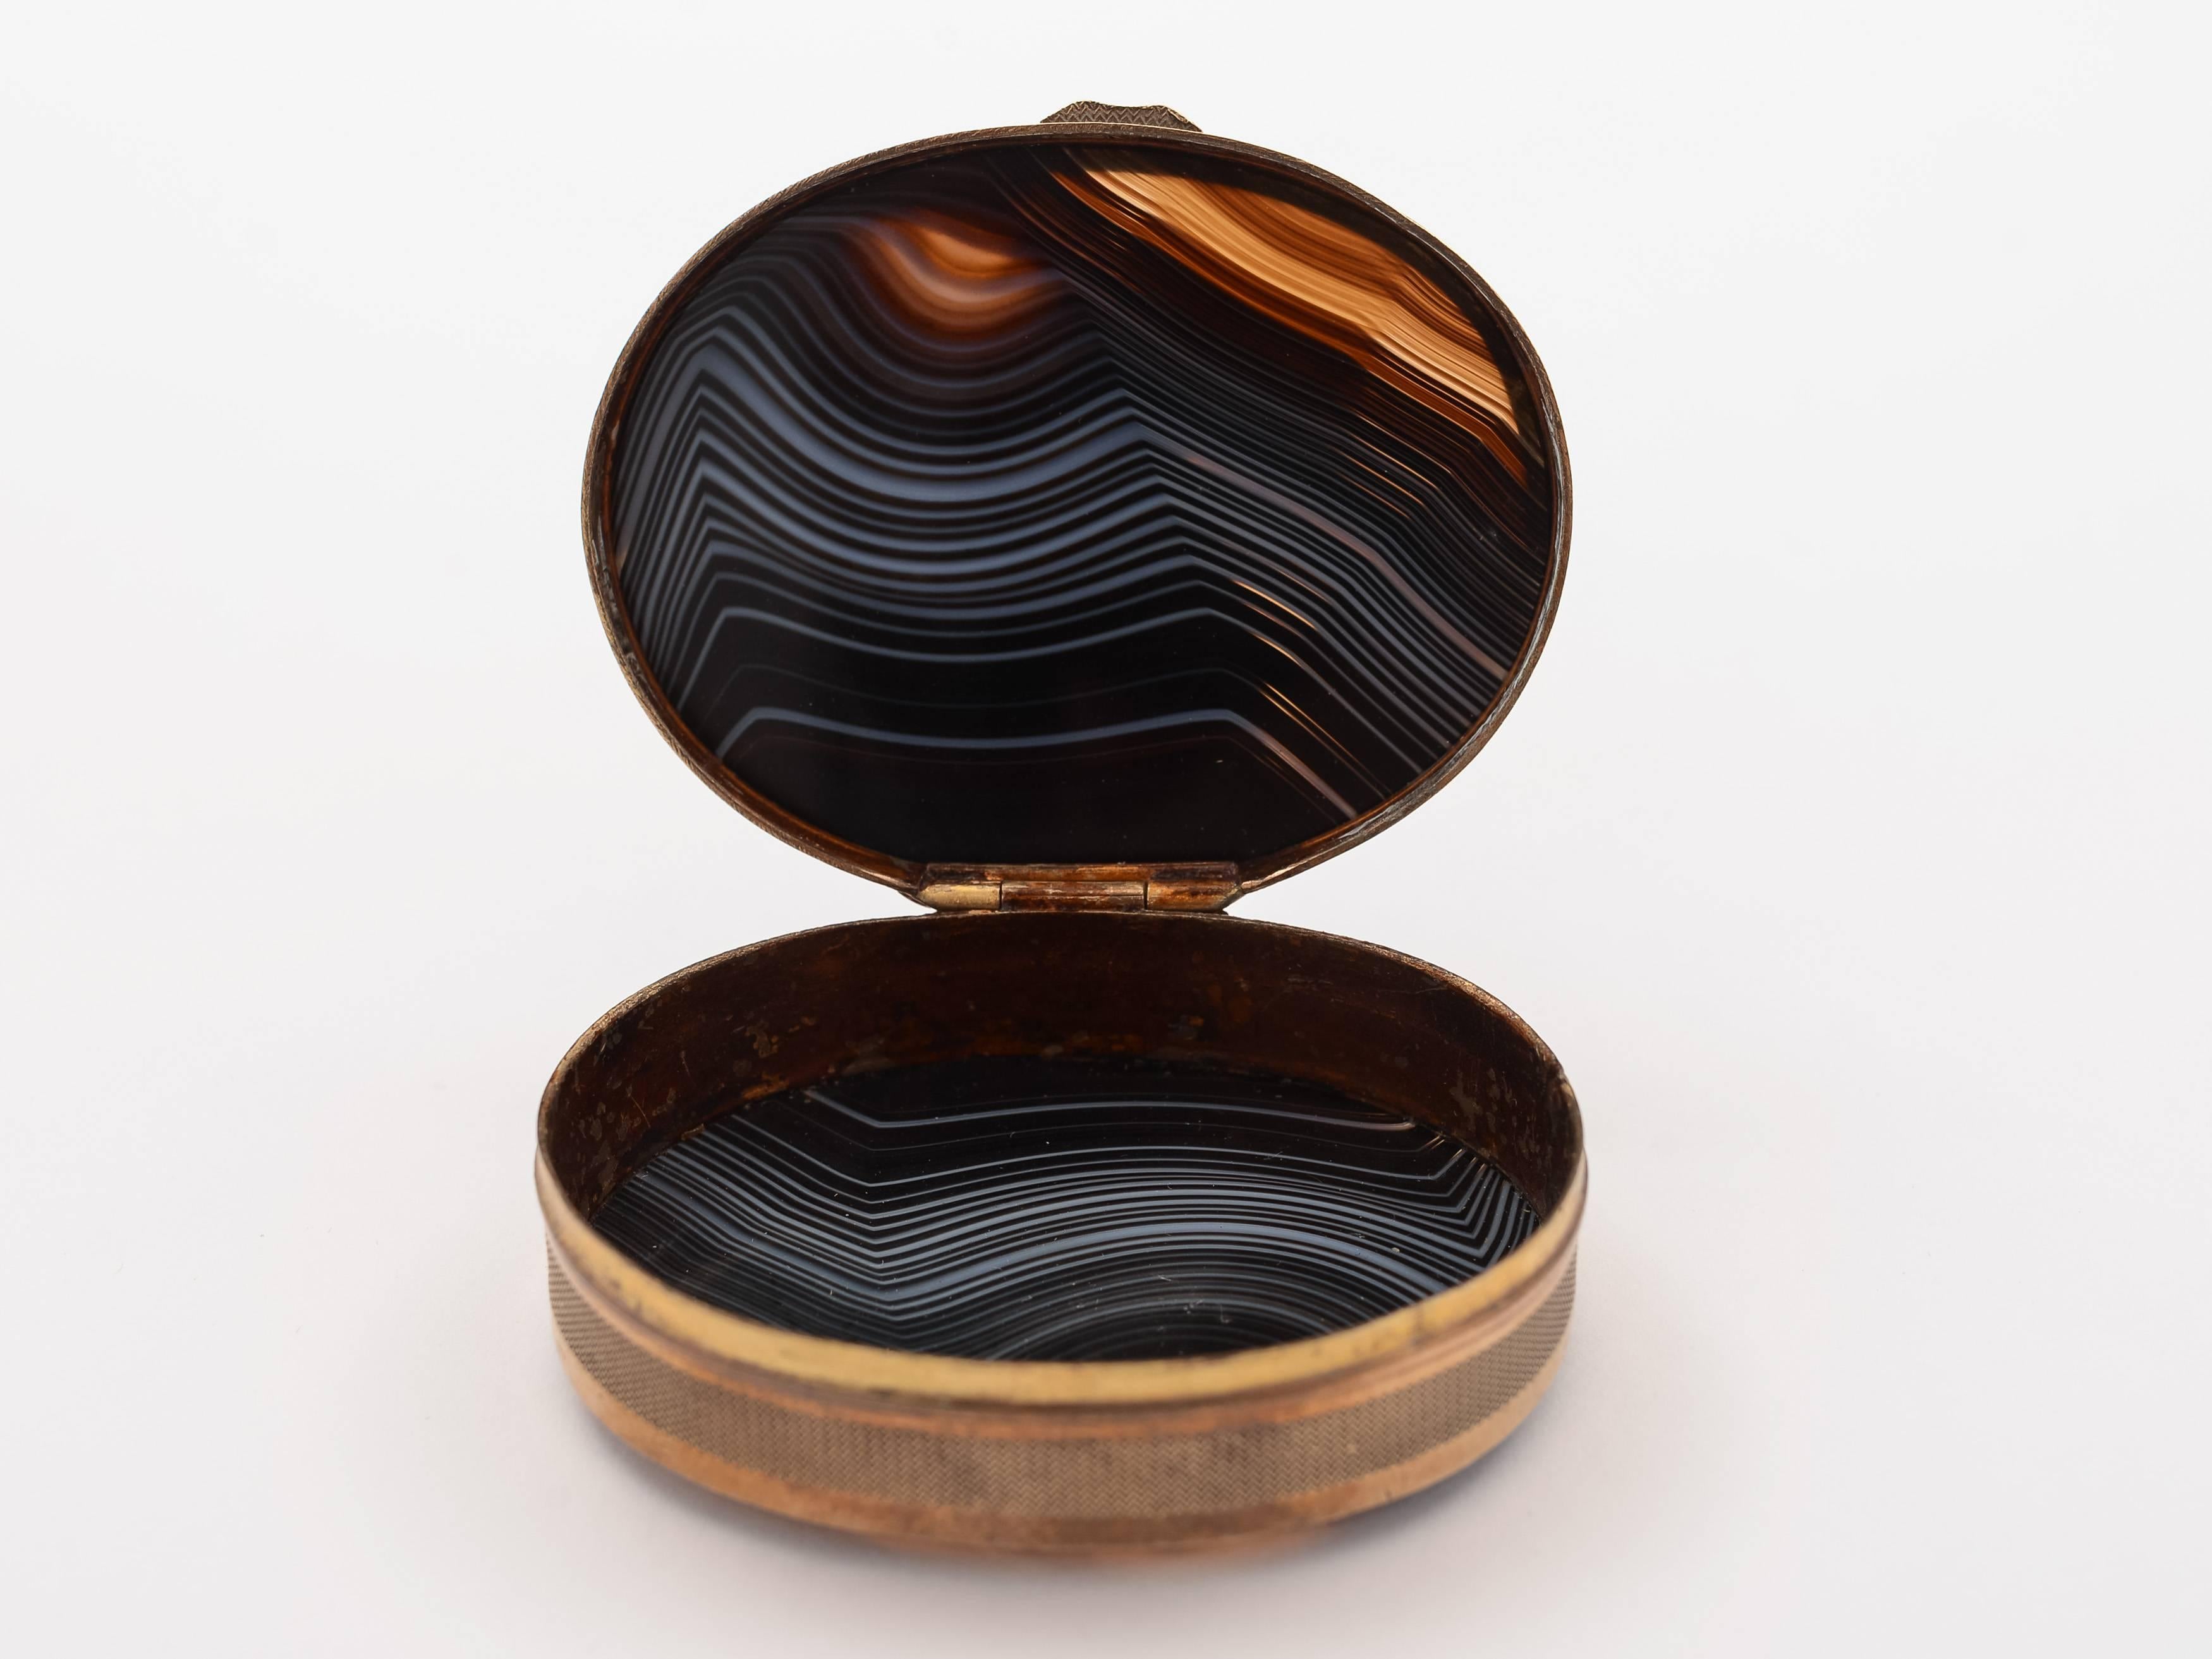 A lovely European agate and brass oval snuff box with tight-fitting hinged lid and agate to lid and base. Has engine-turned decoration to the brass, circa 1900.

Free worldwide delivery. 

Measurements:
Height: 3 1/4